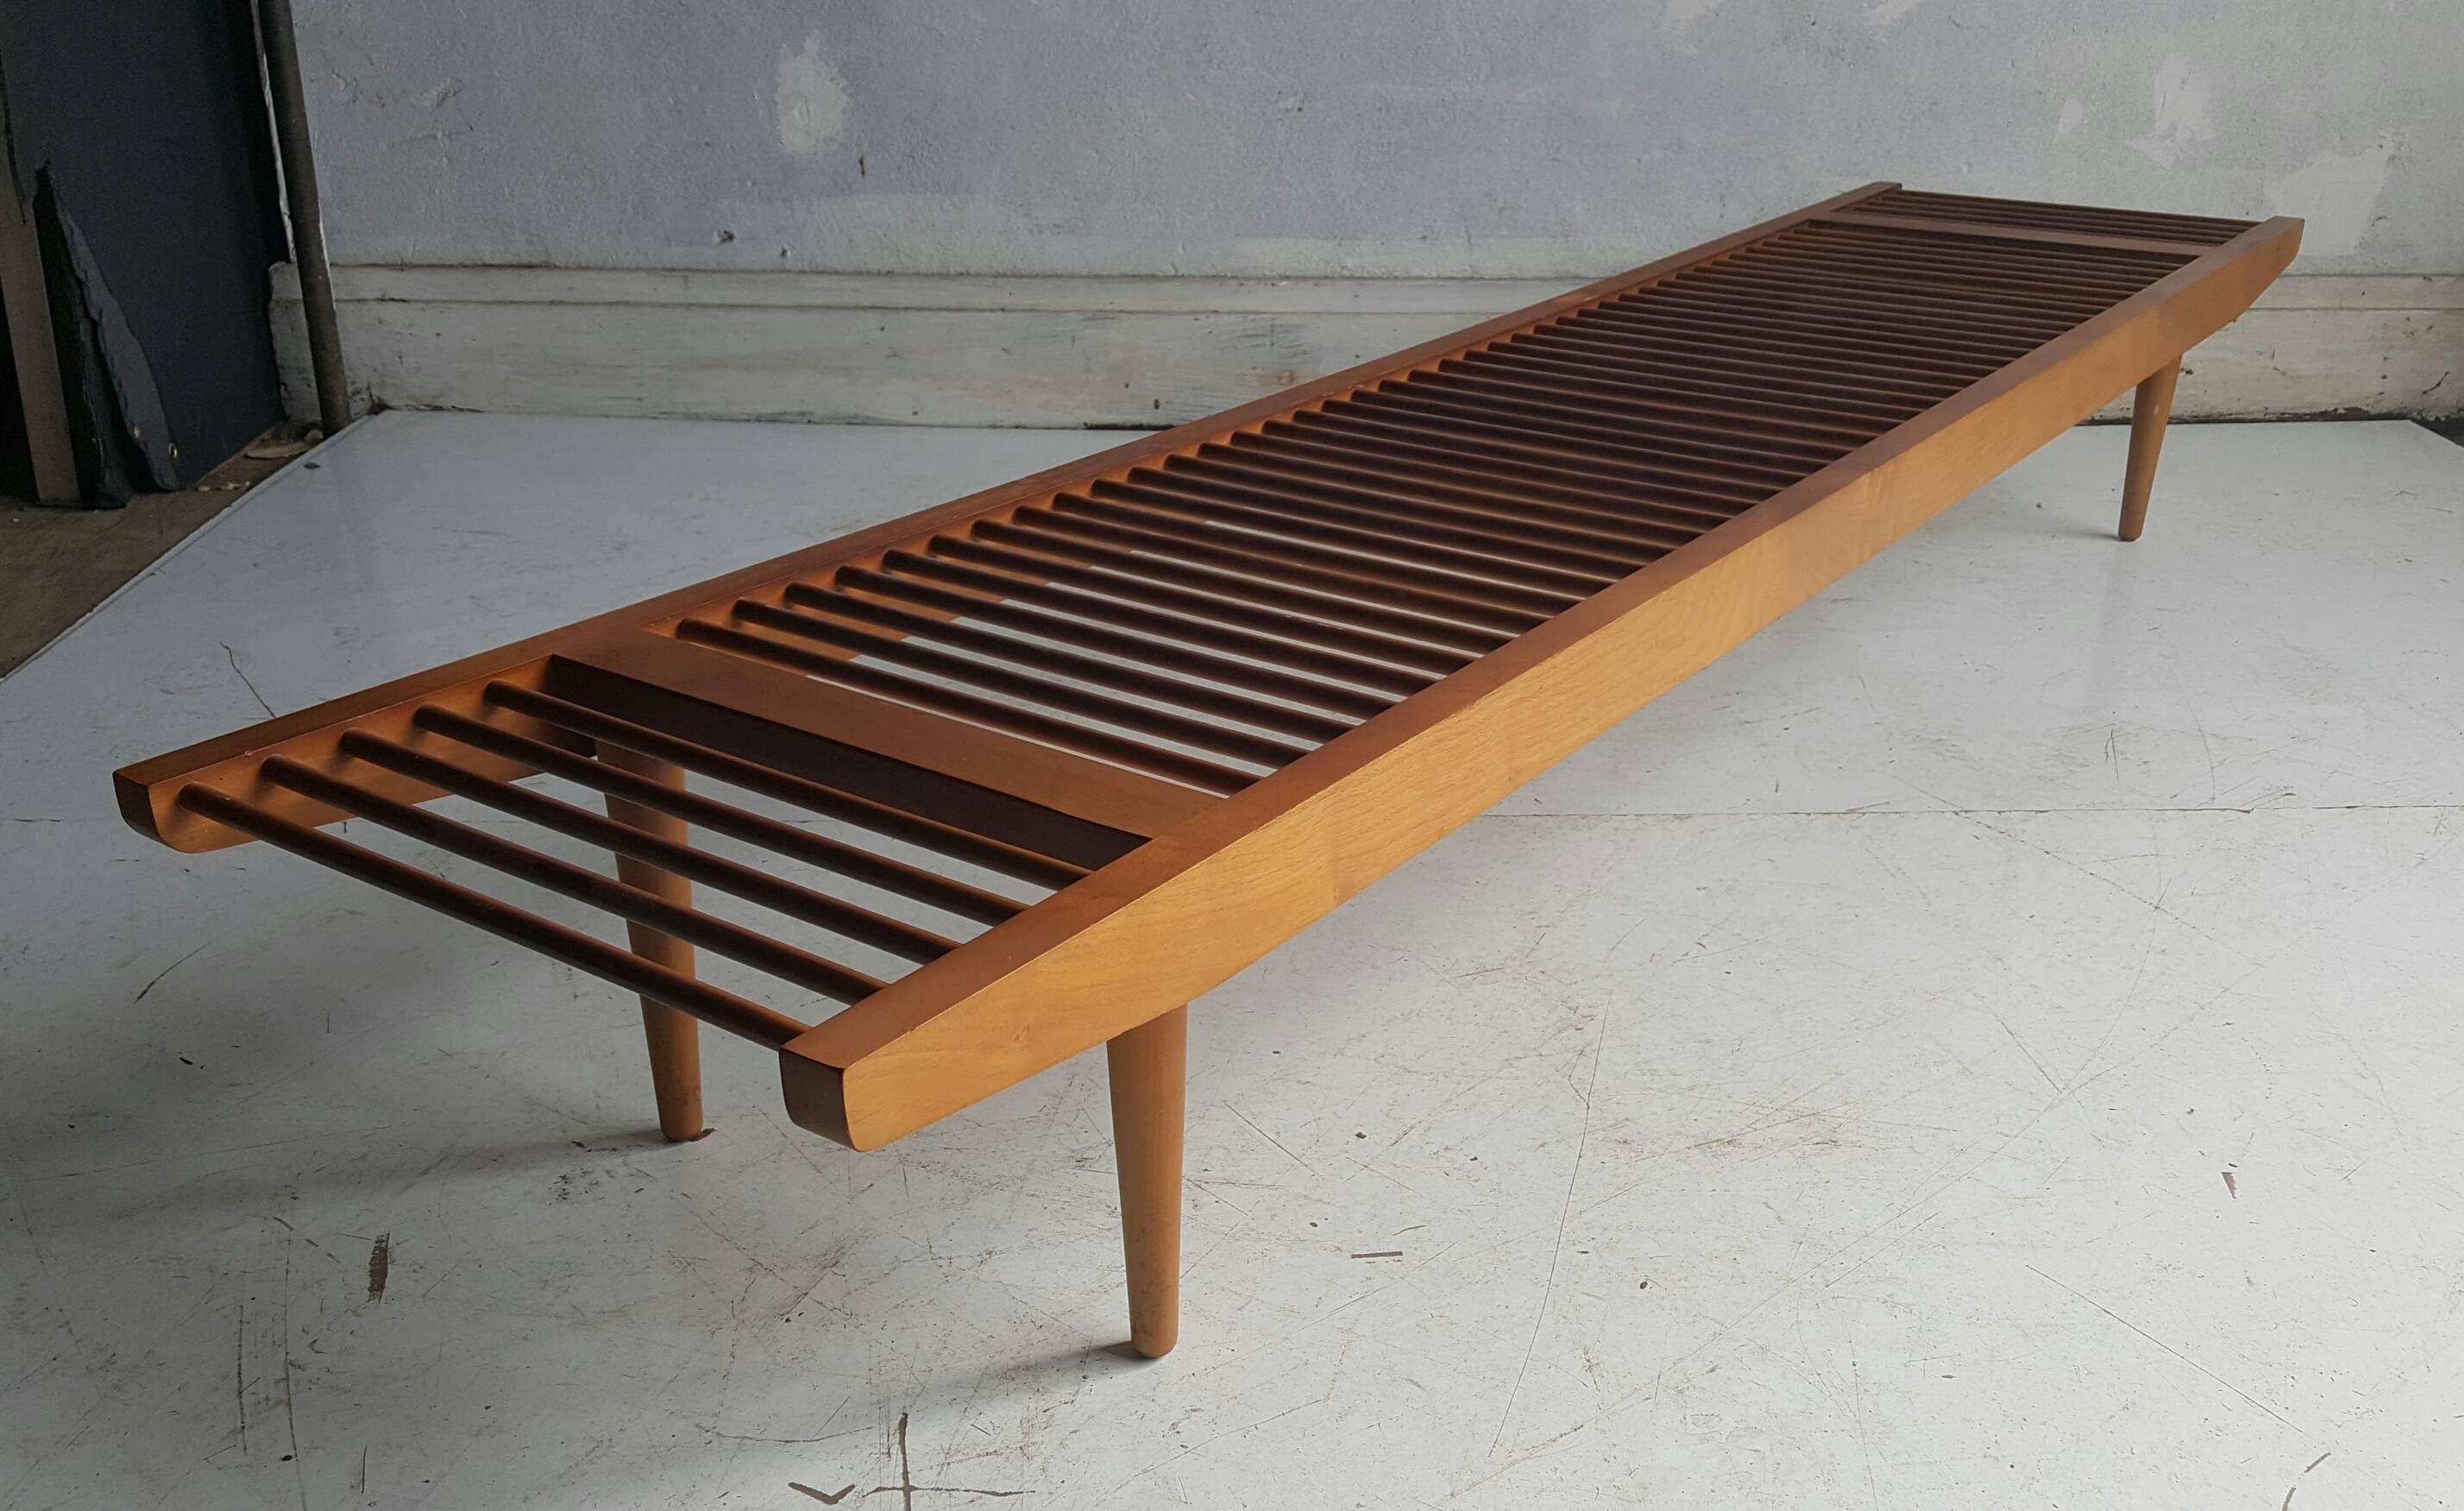 California Modern bench or coffee table, designed by Milo Baughman for Glenn of California, circa 1950s. Modernist low profile, Dowell design, can be used as a bench or long and low coffee table.